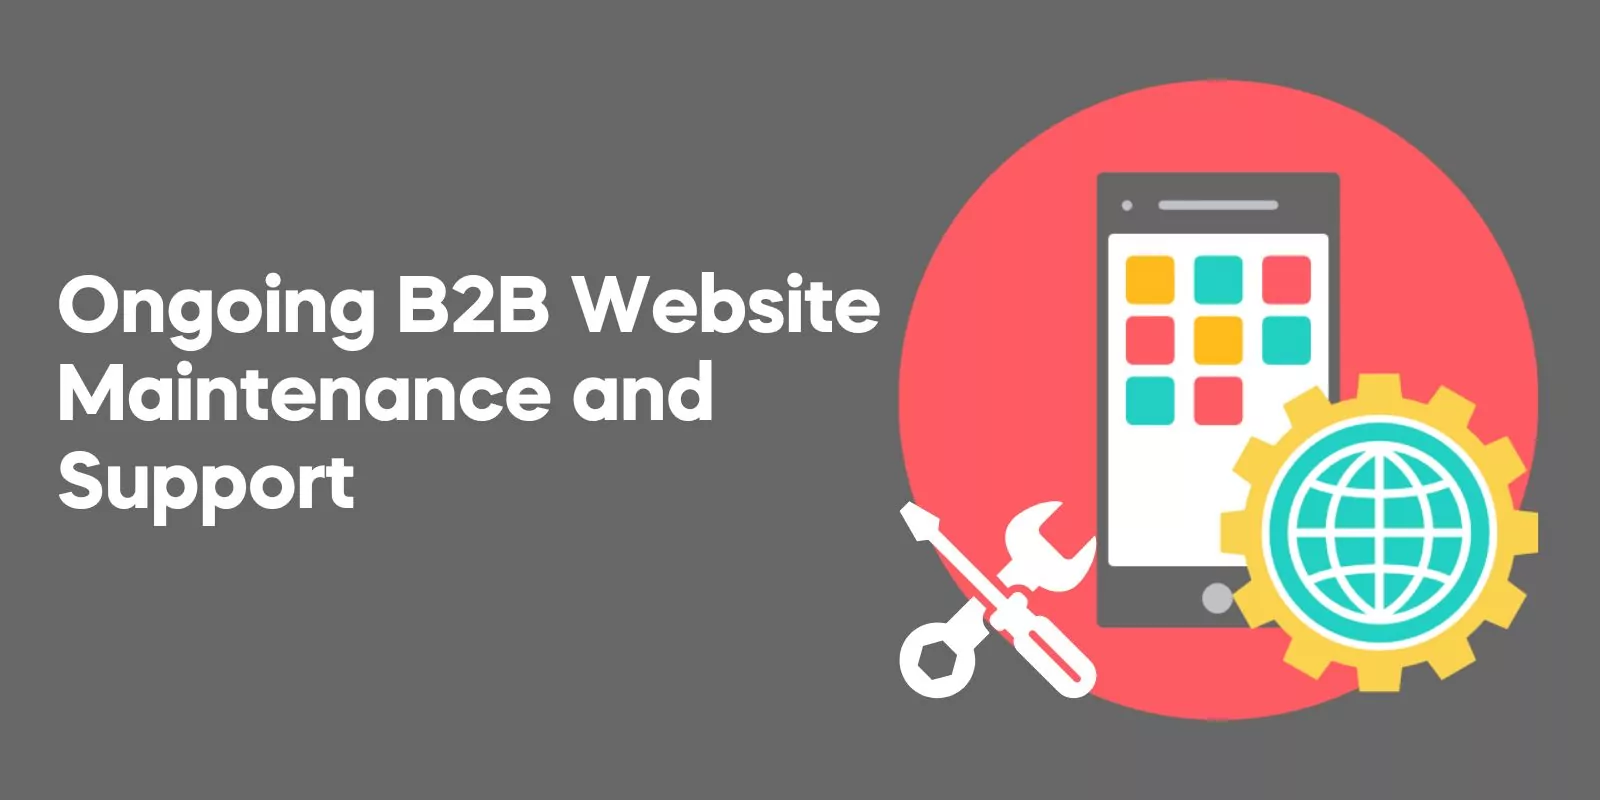 Ongoing B2B Website Maintenance and Support